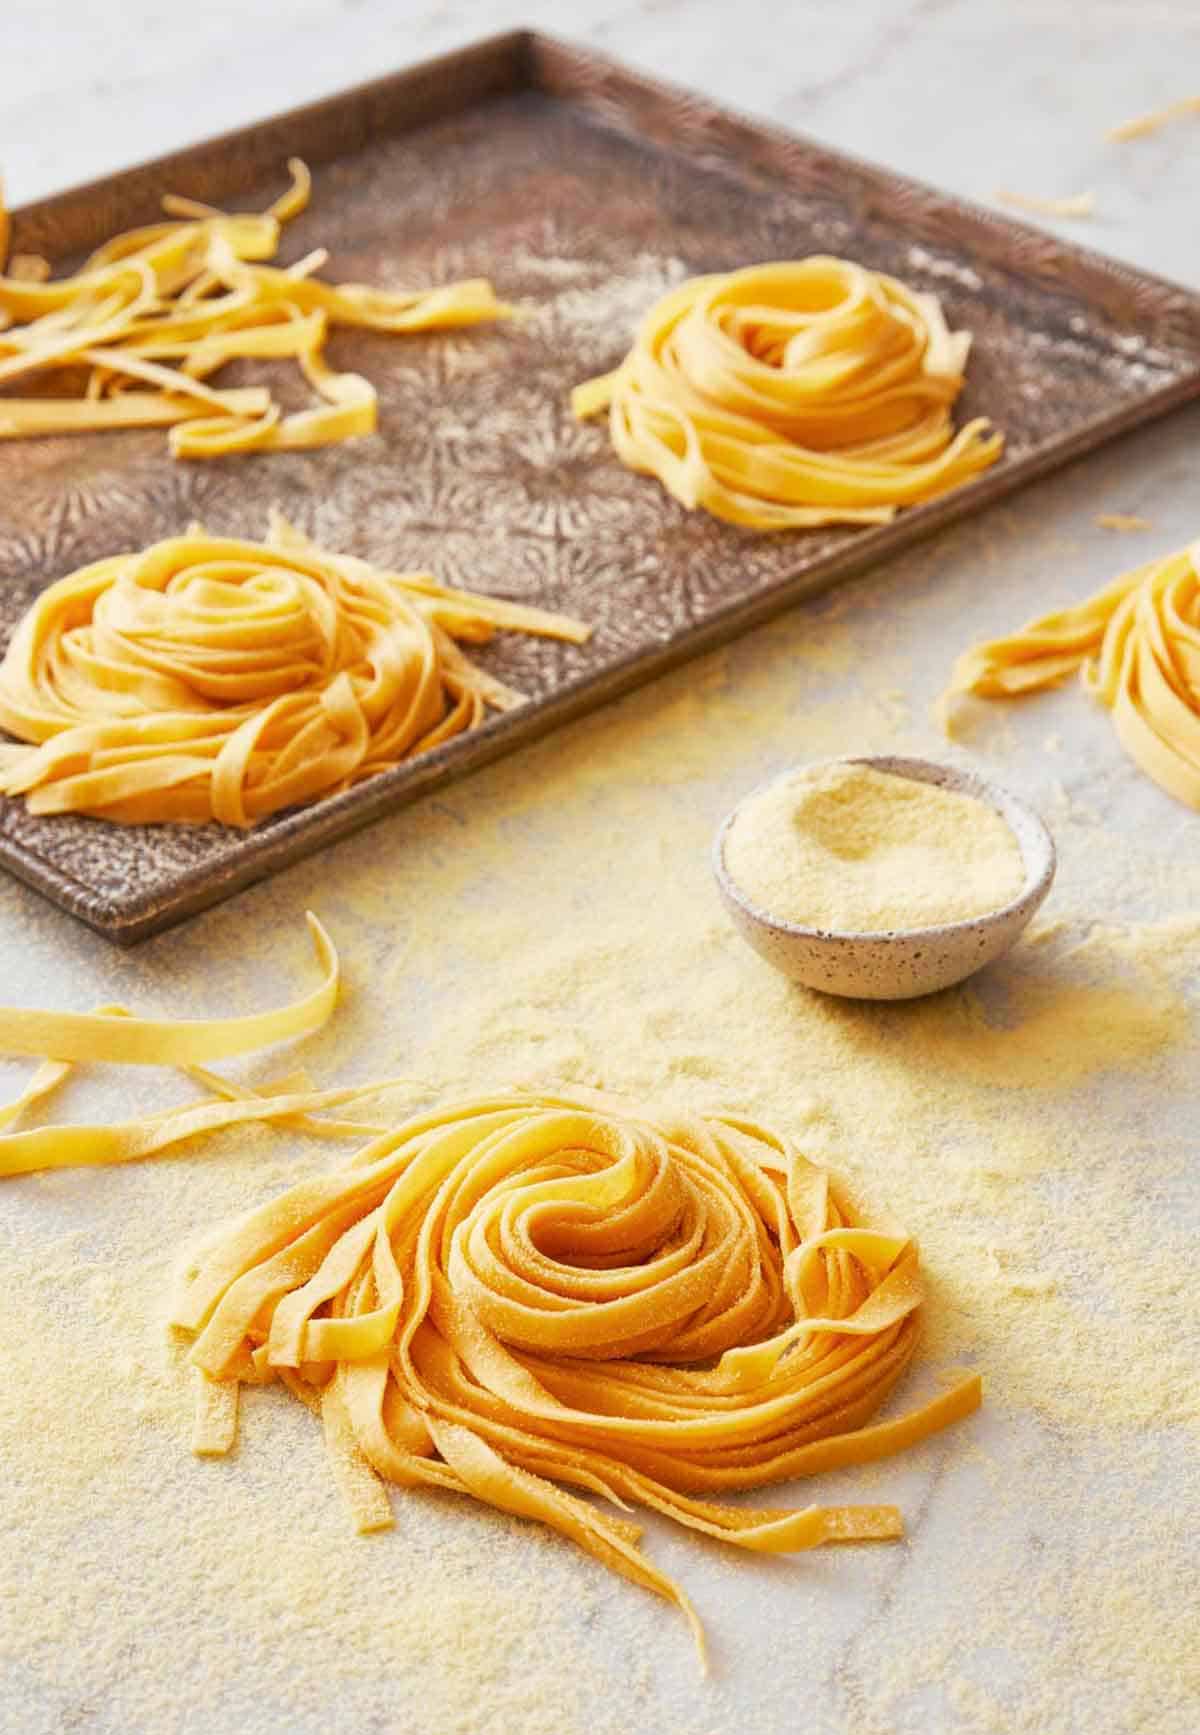 Multiple bundles of pasta dough on a sheet pan with one in the foreground with a small bowl of semolina flour.